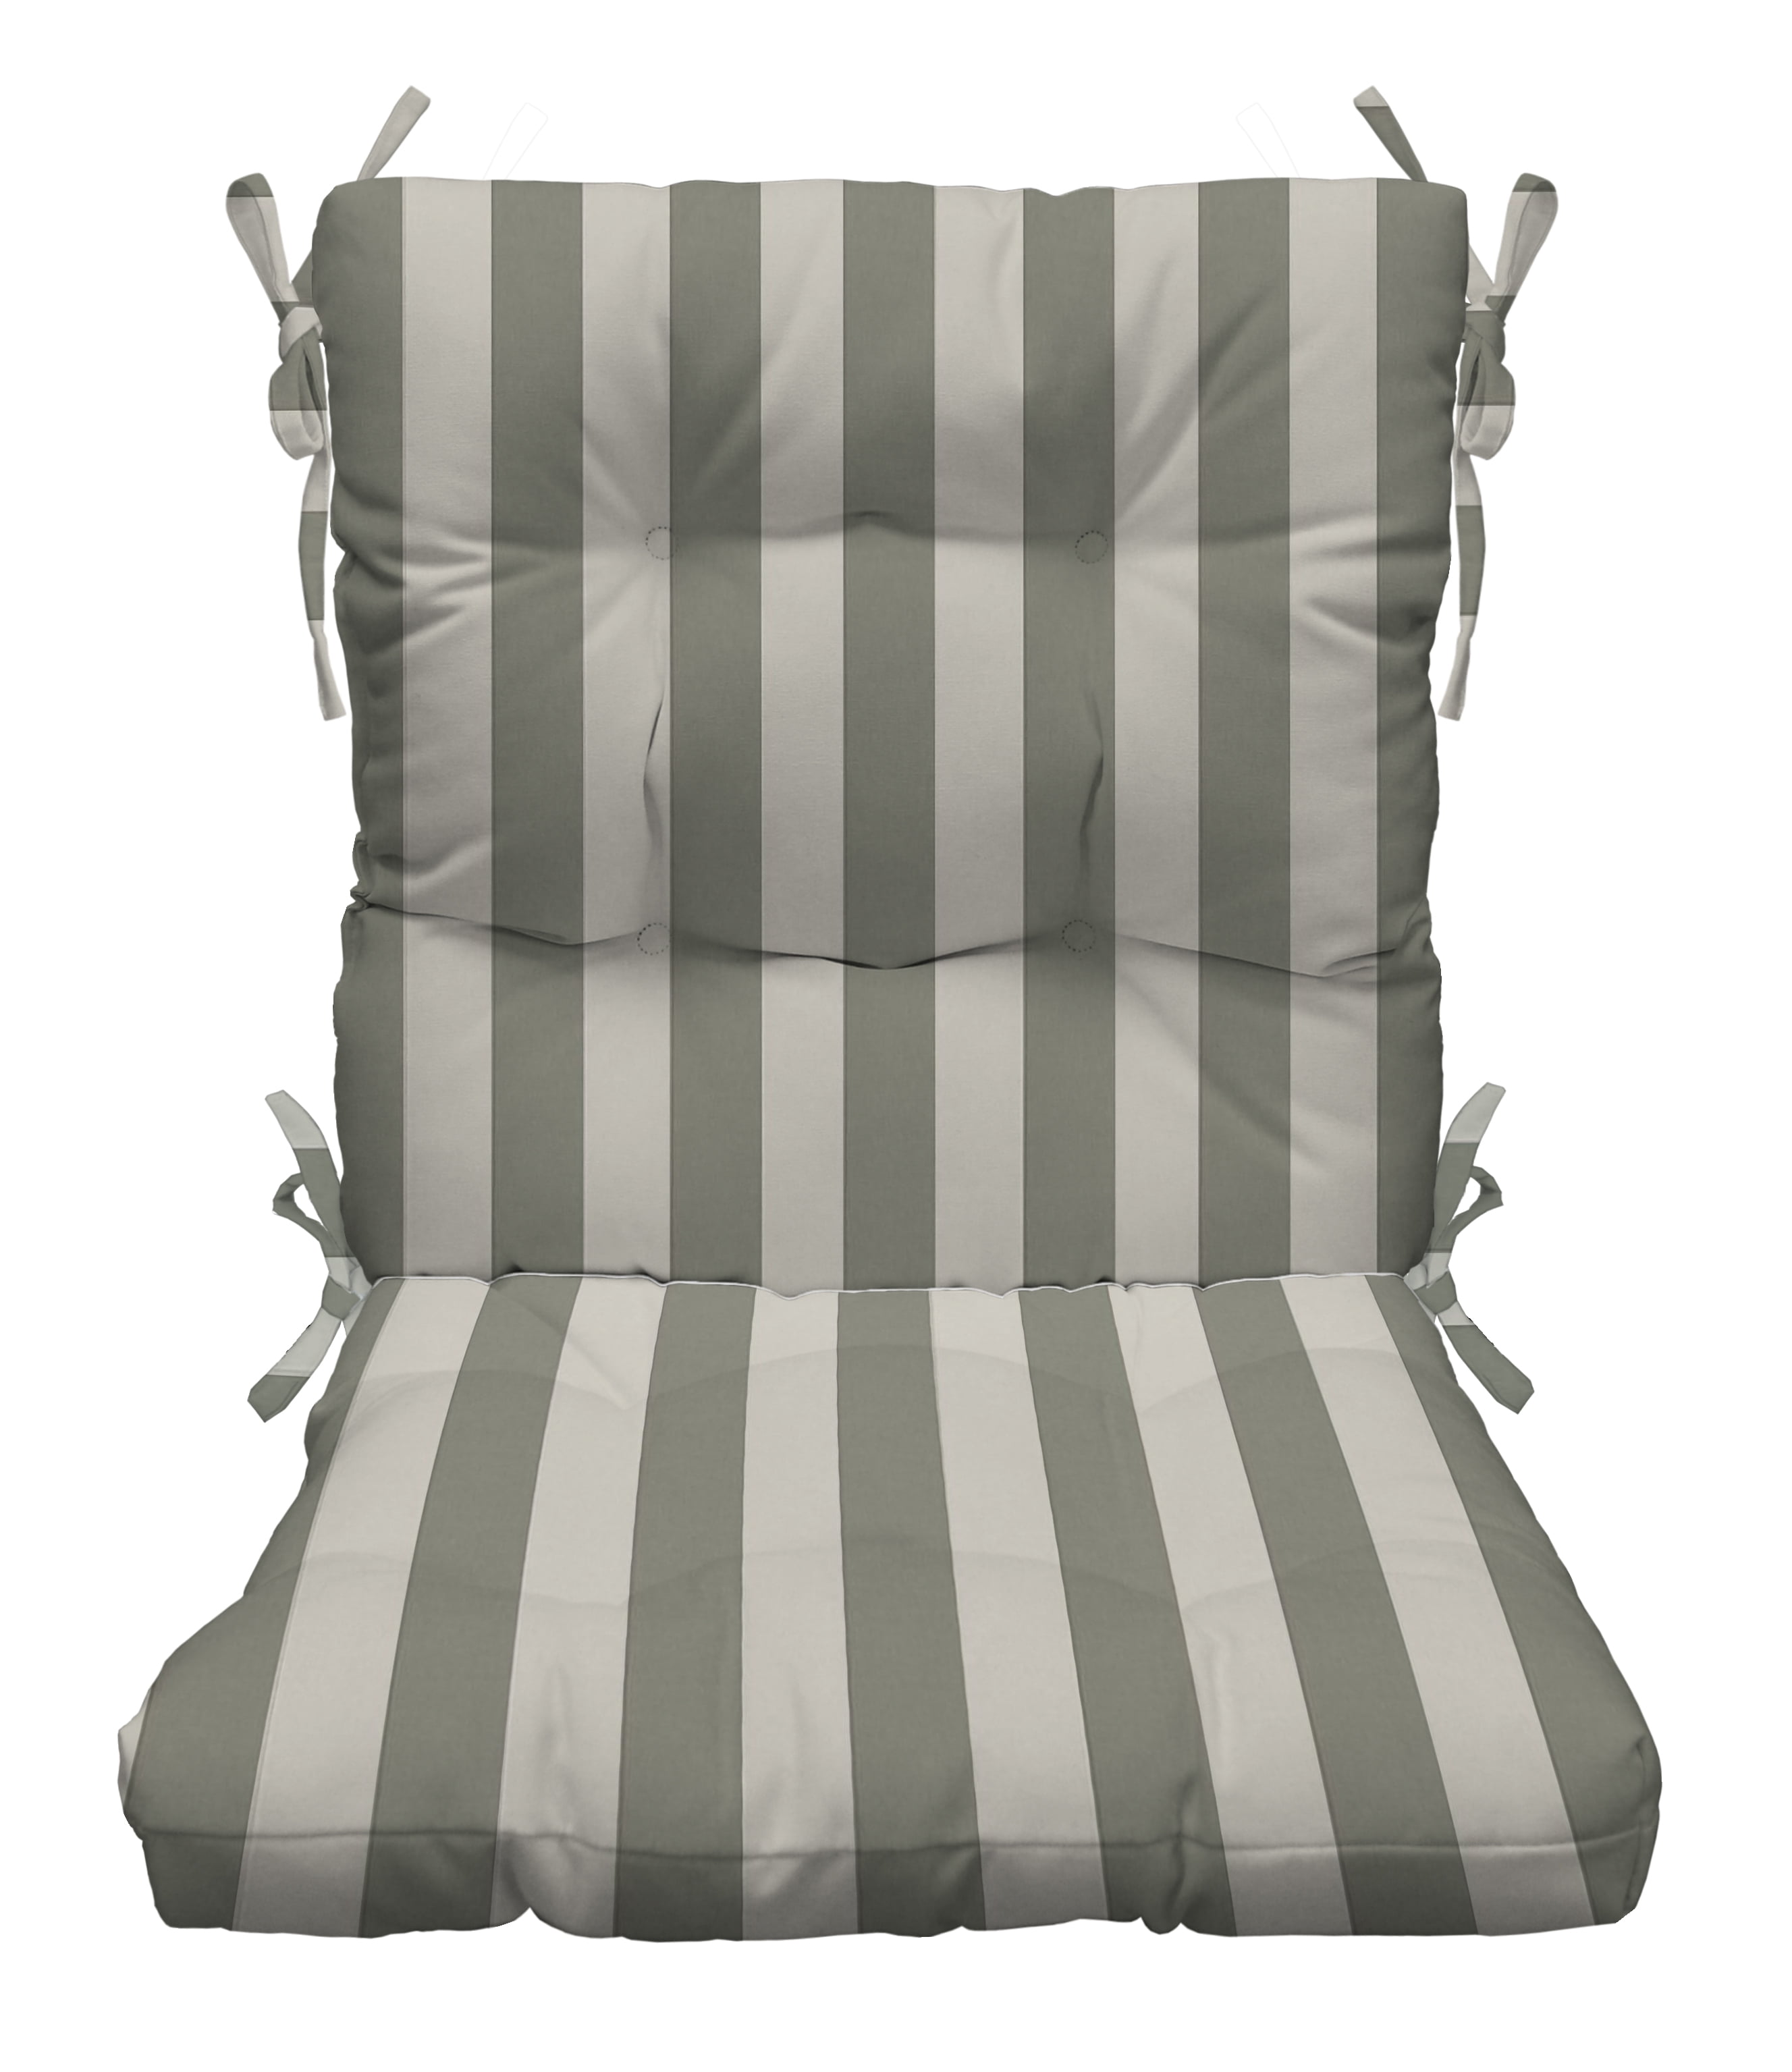 44" High Back Chair Cushion Tufted Pillow Indoor Outdoor Swing Glider Seat Gray 